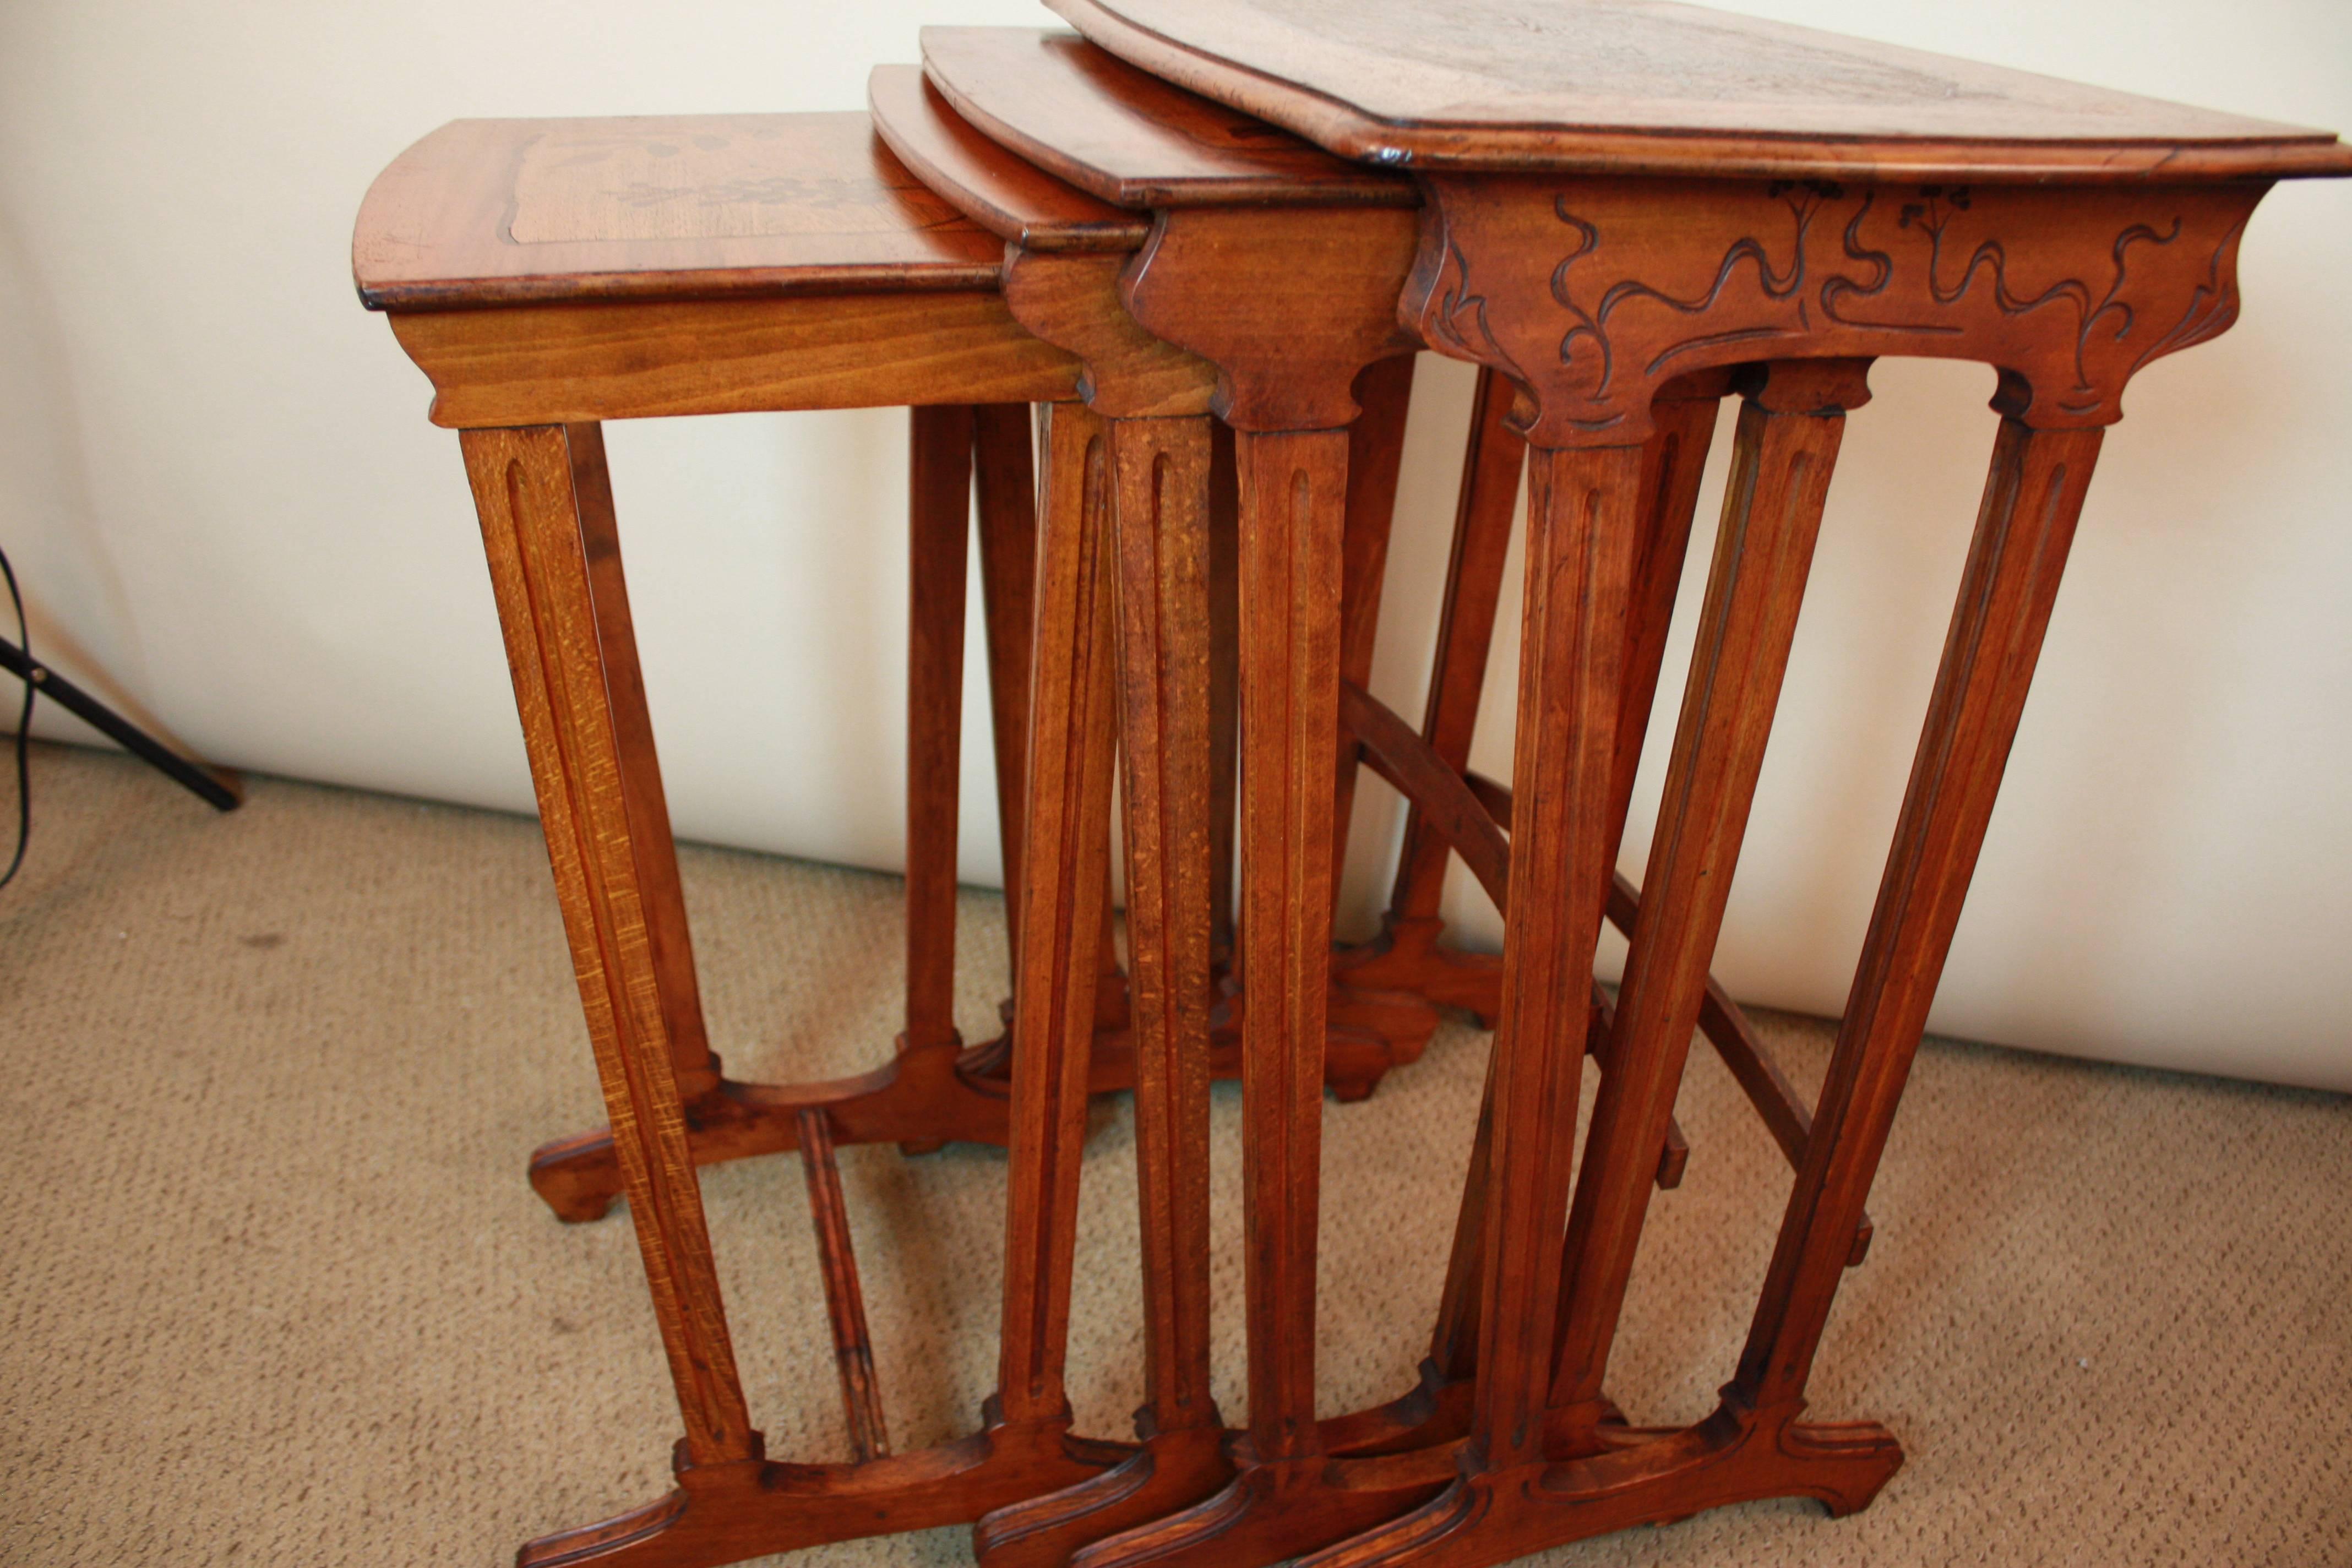 Early 20th Century French Art Nouveau Nesting Tables